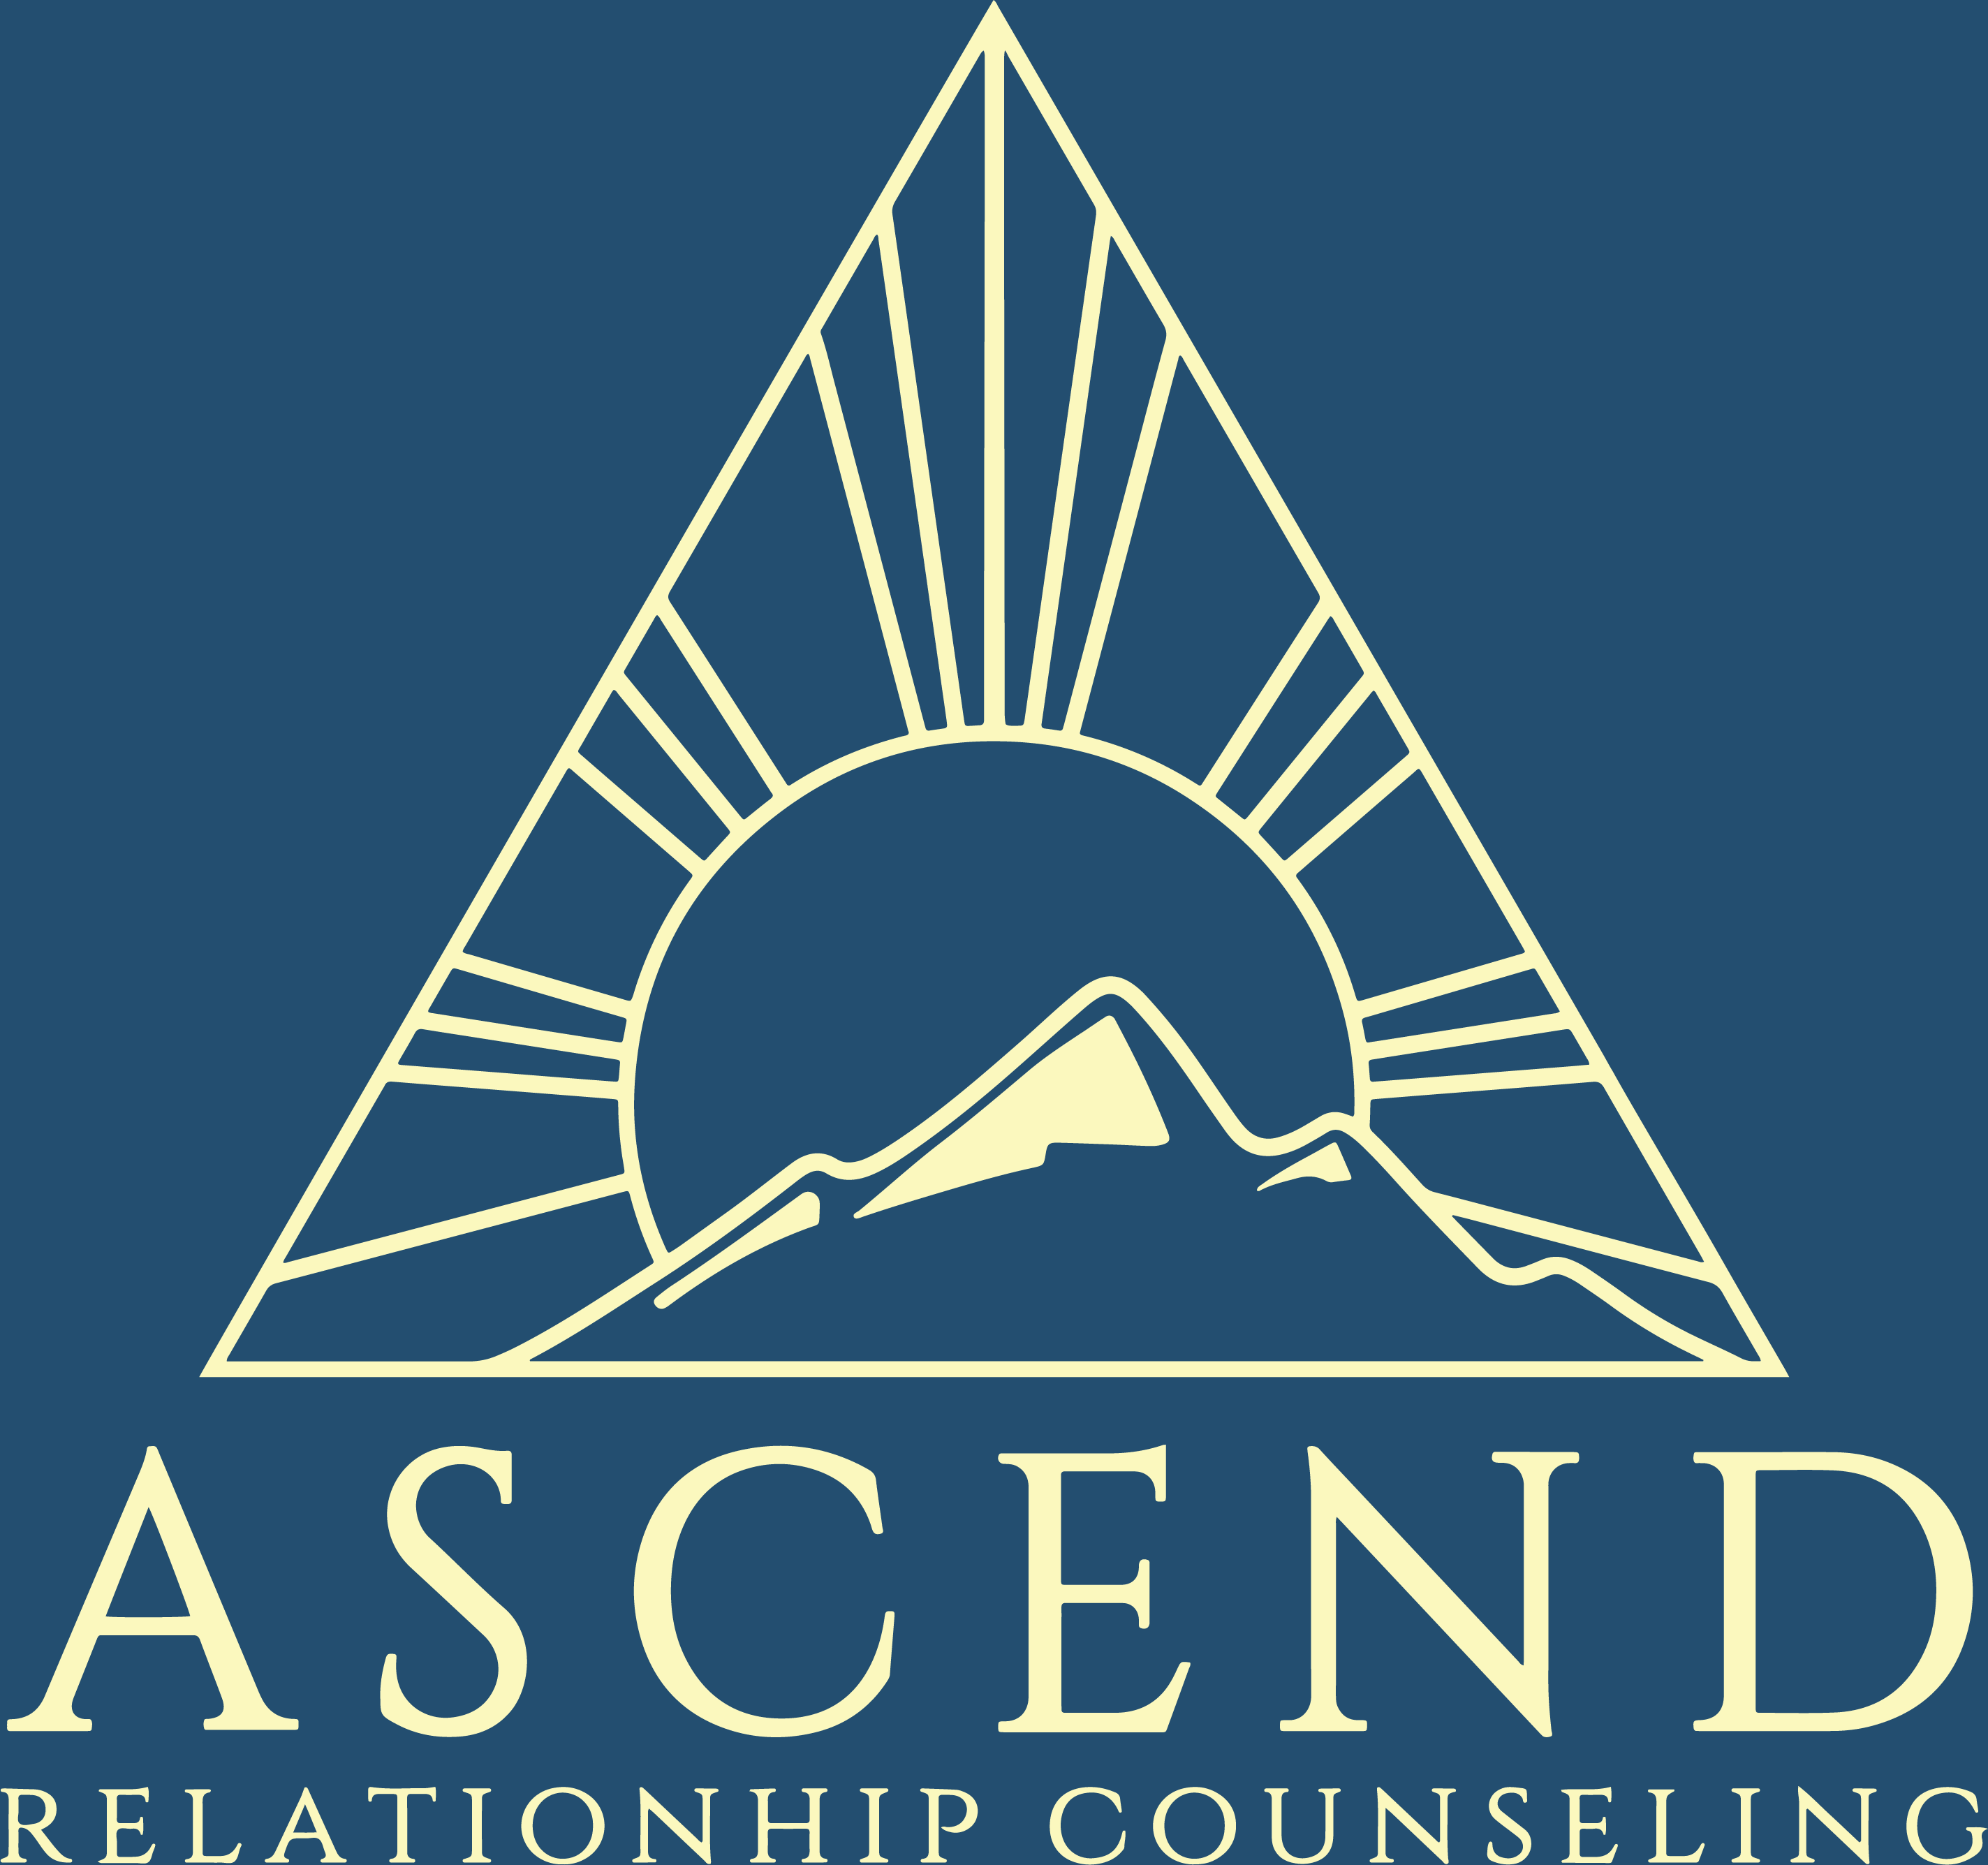 Ascend Relationship Counseling